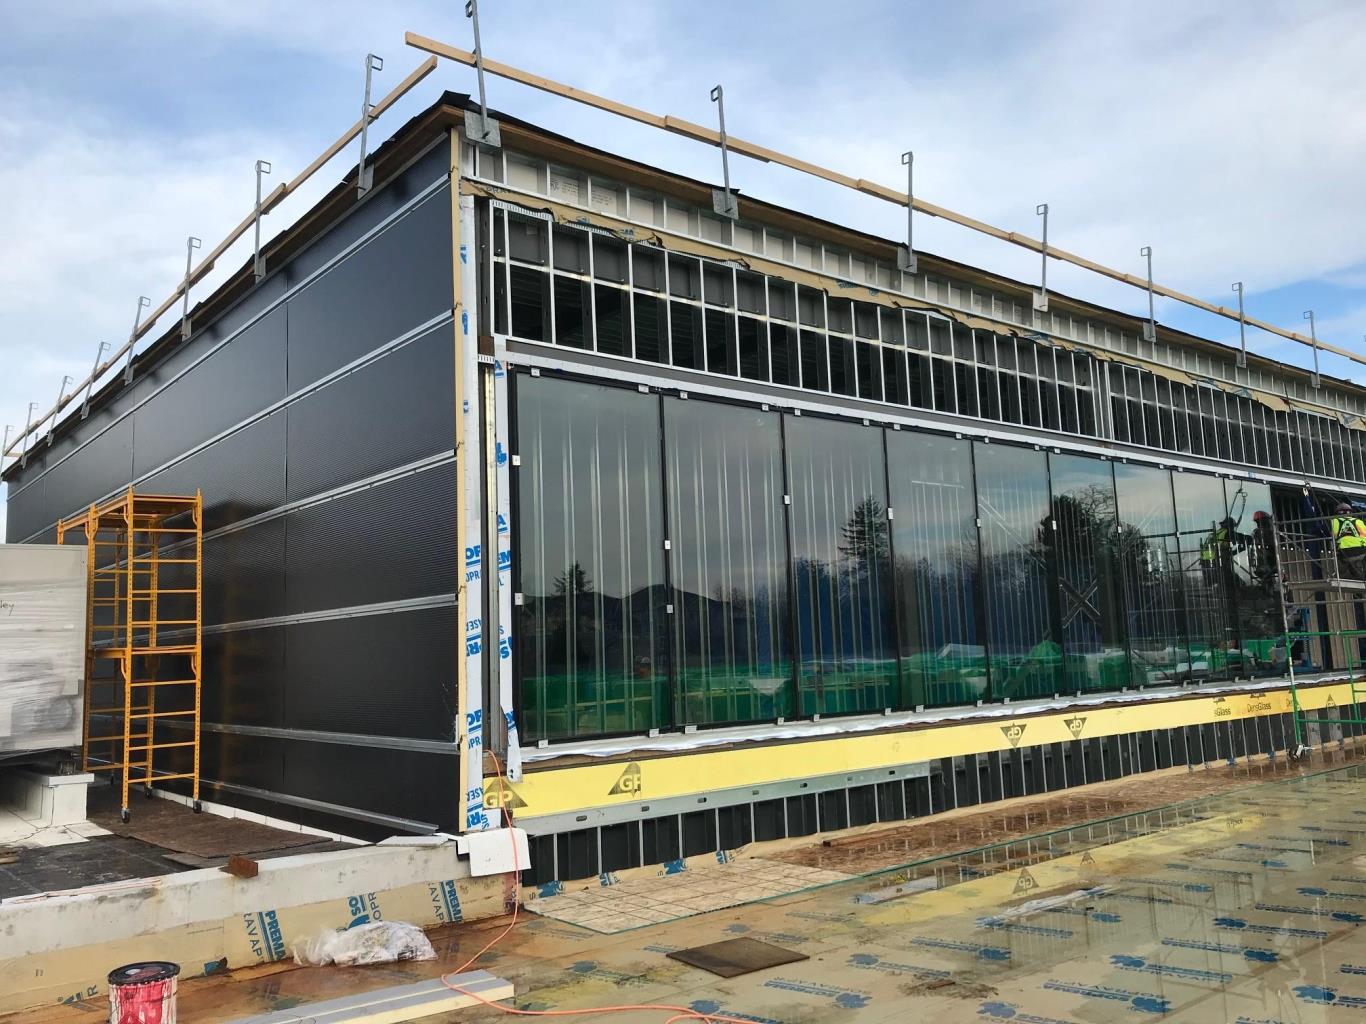 Roof top clearstory glazing being installed - January 15, 2020